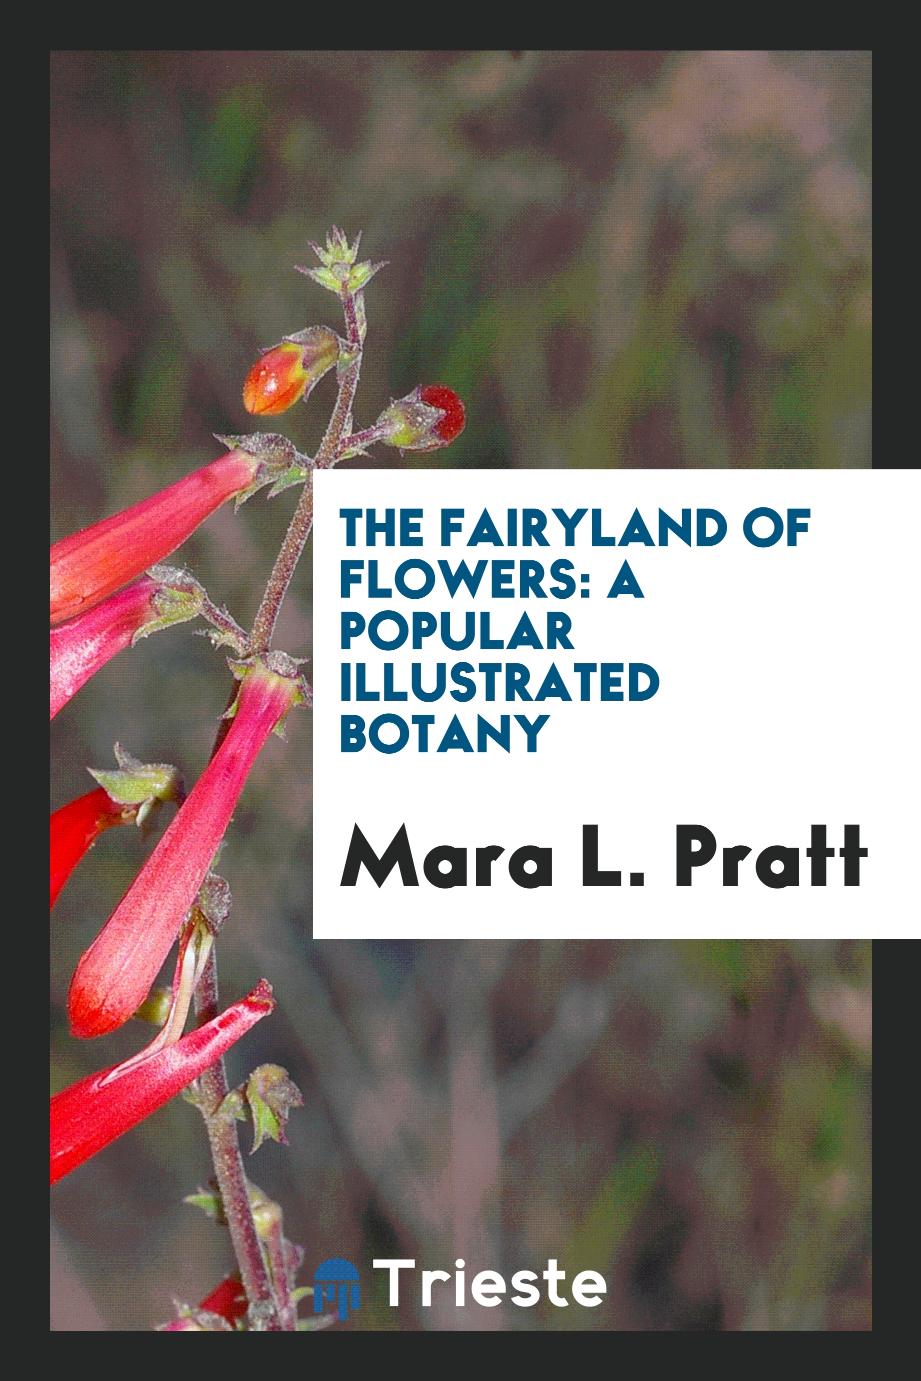 The Fairyland of Flowers: A Popular Illustrated Botany